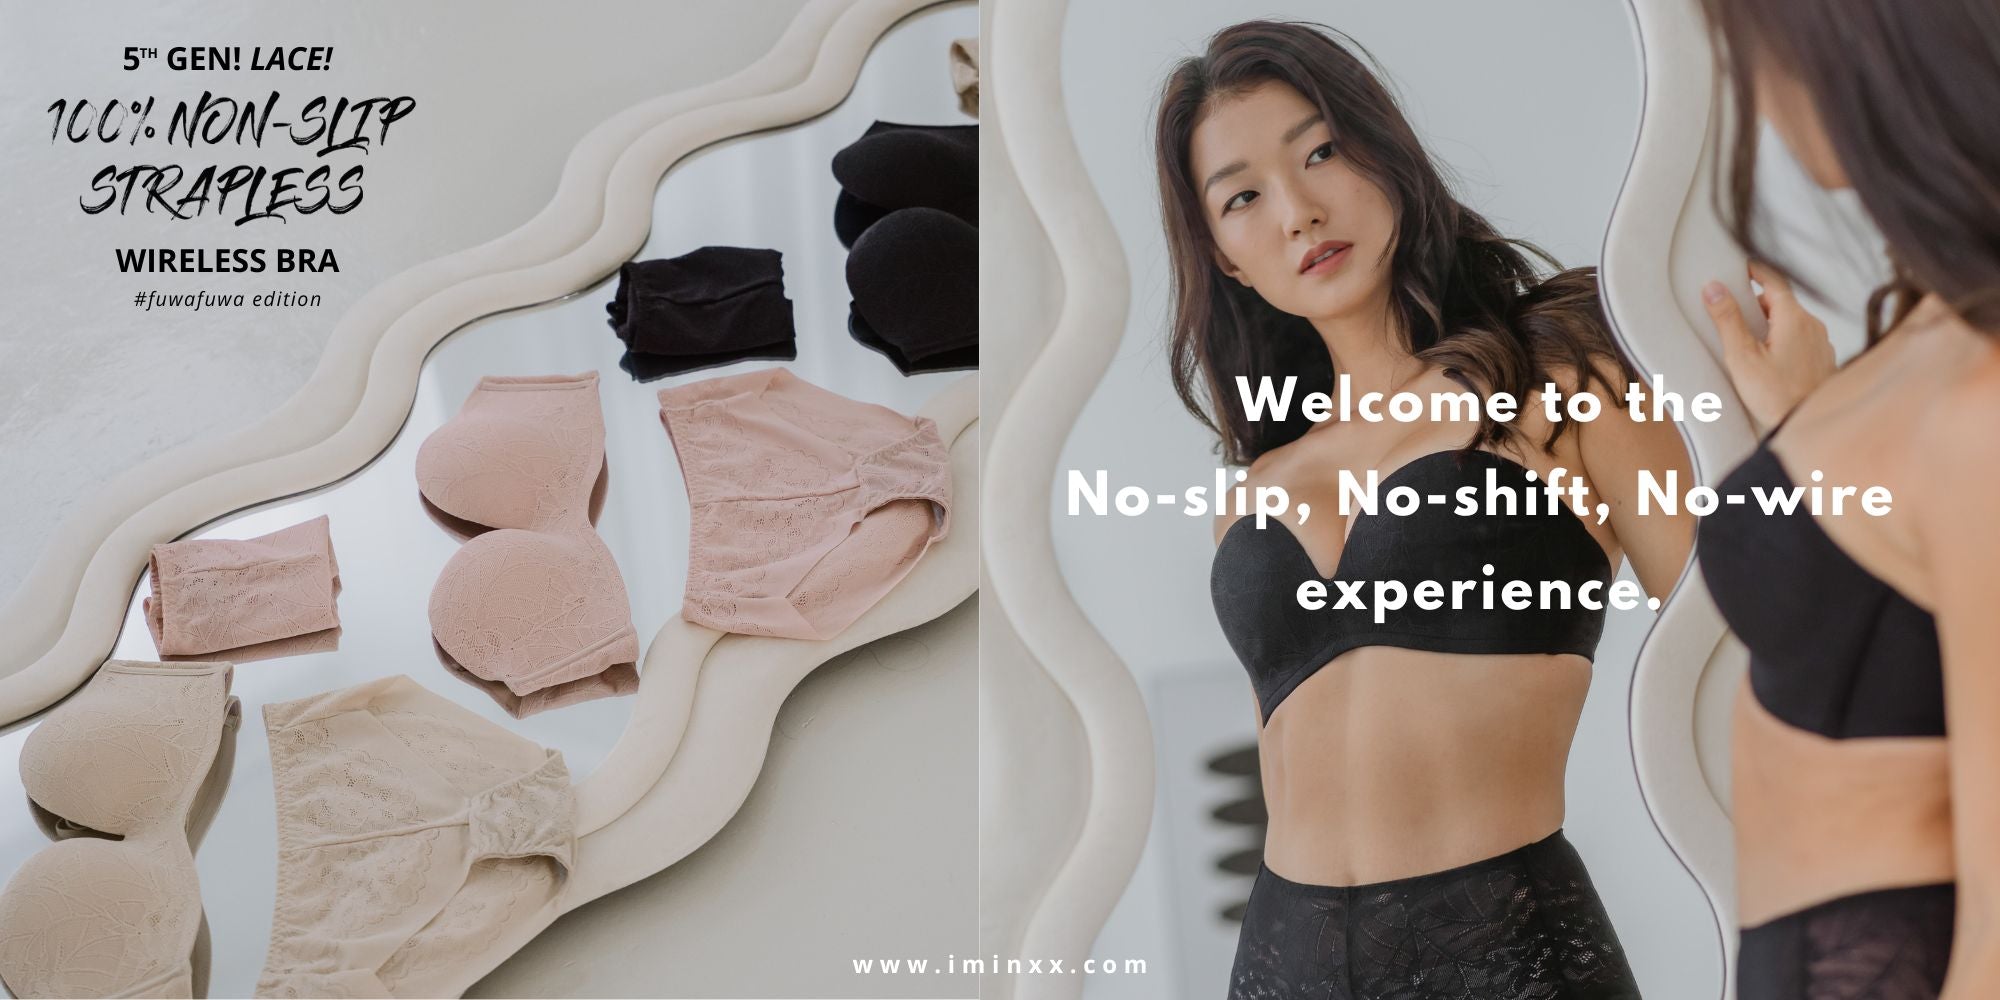 Where To Buy Cheap Lingerie Locally & Online (Pics) 